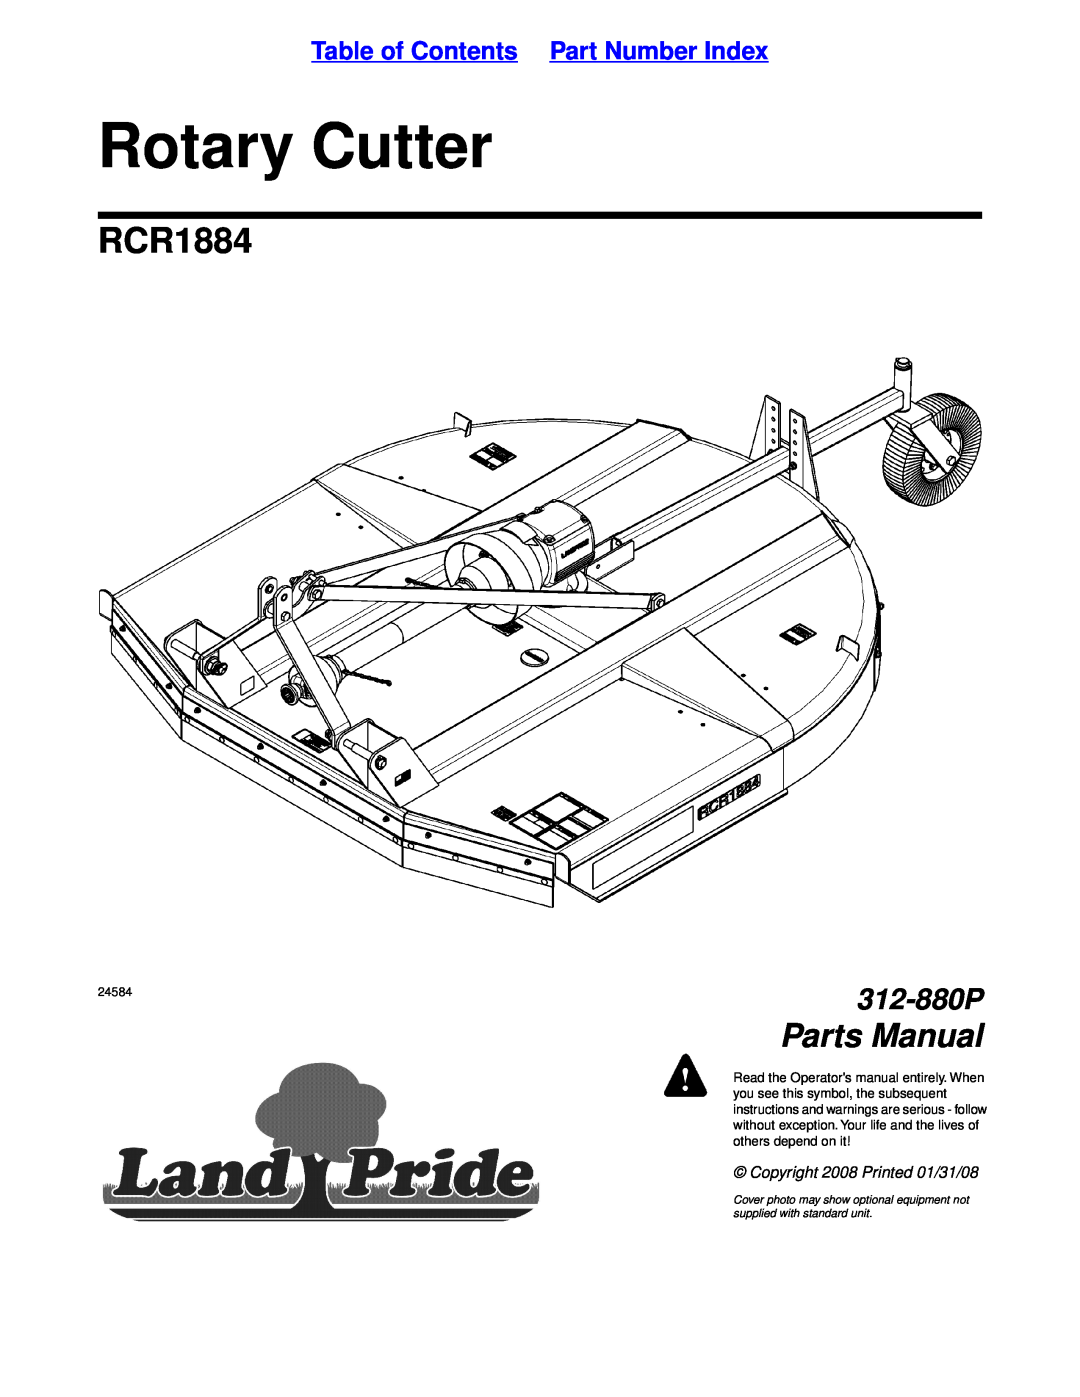 Land Pride RCR1884 manual Table of Contents Part Number Index, Rotary Cutter, Parts Manual, 312-880P, others depend on it 